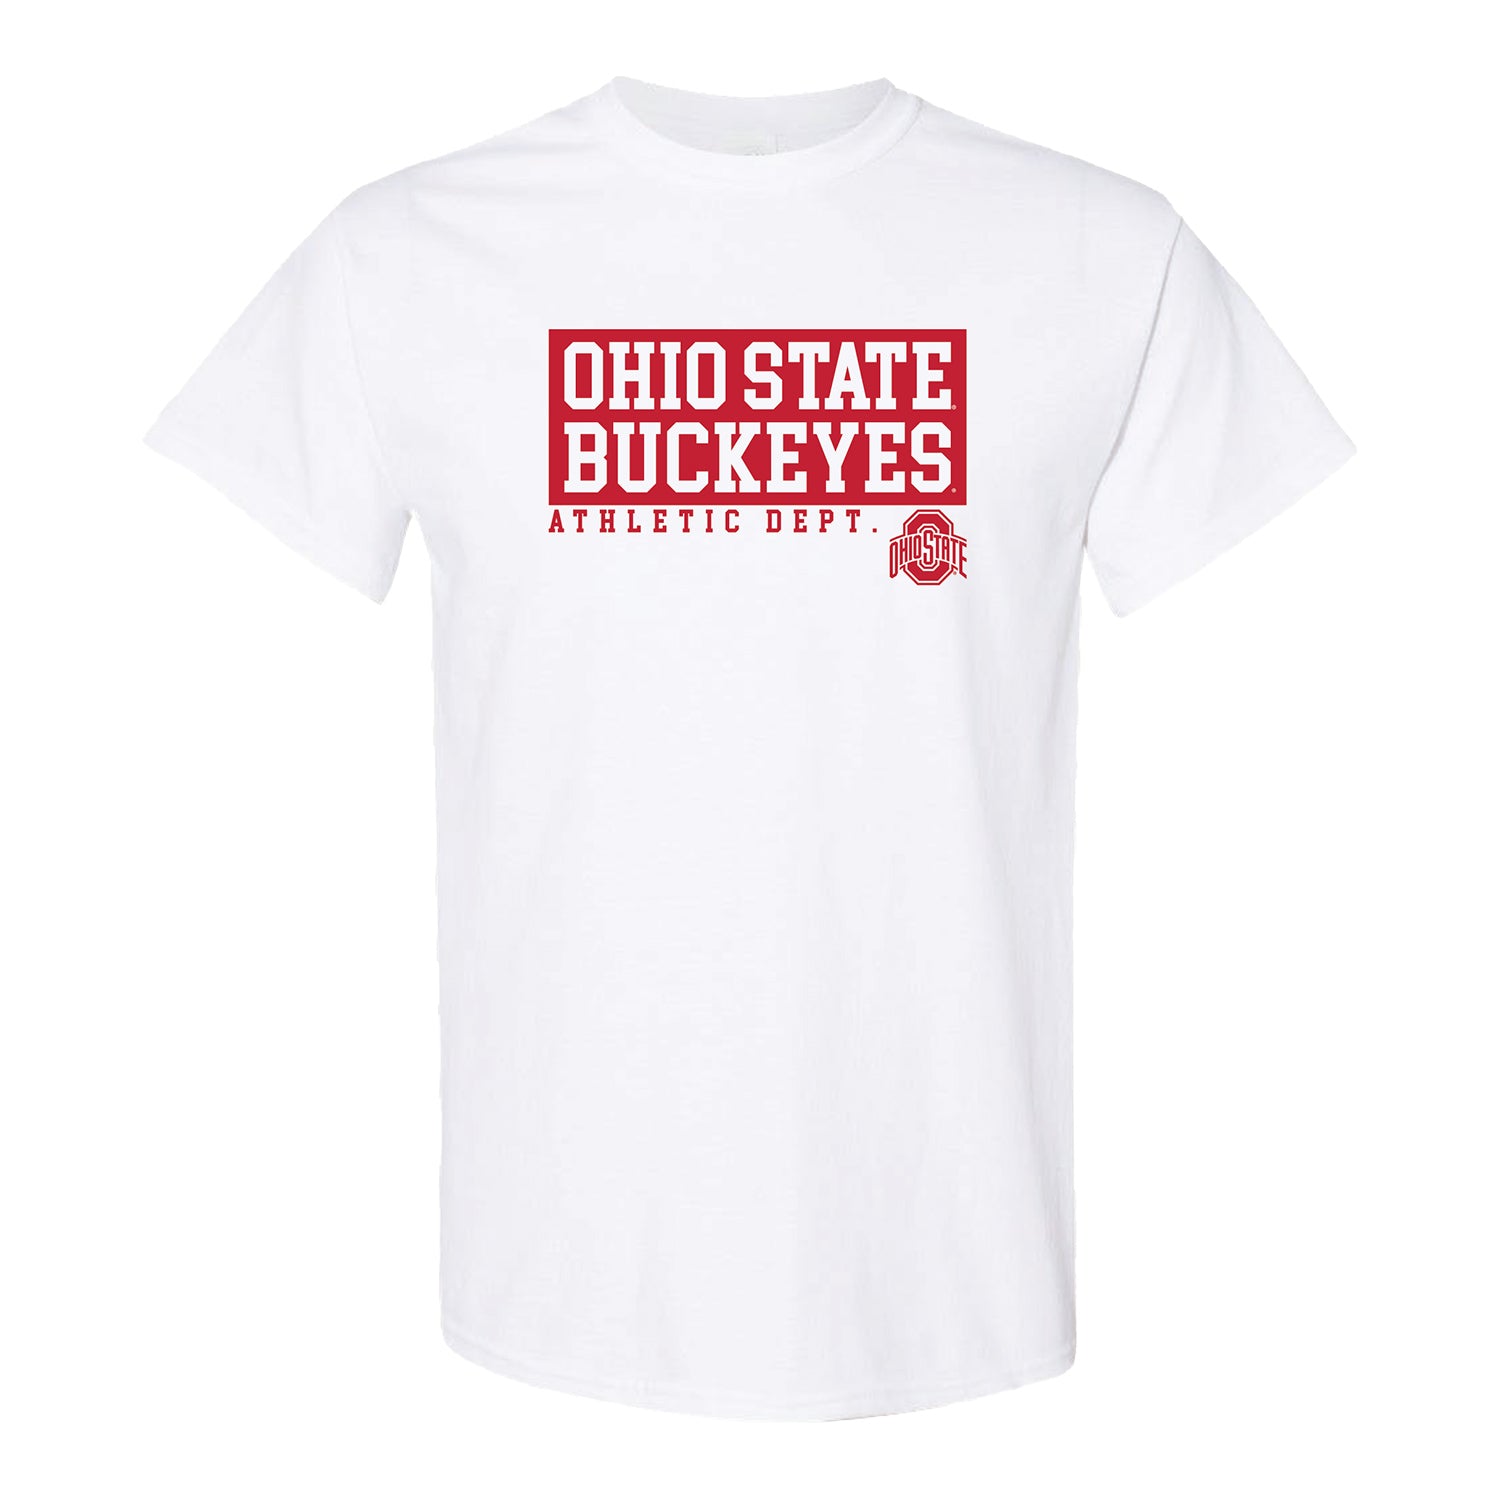 THE® Branded Ohio State Buckeyes Athletic Department White Tee | Shop ...